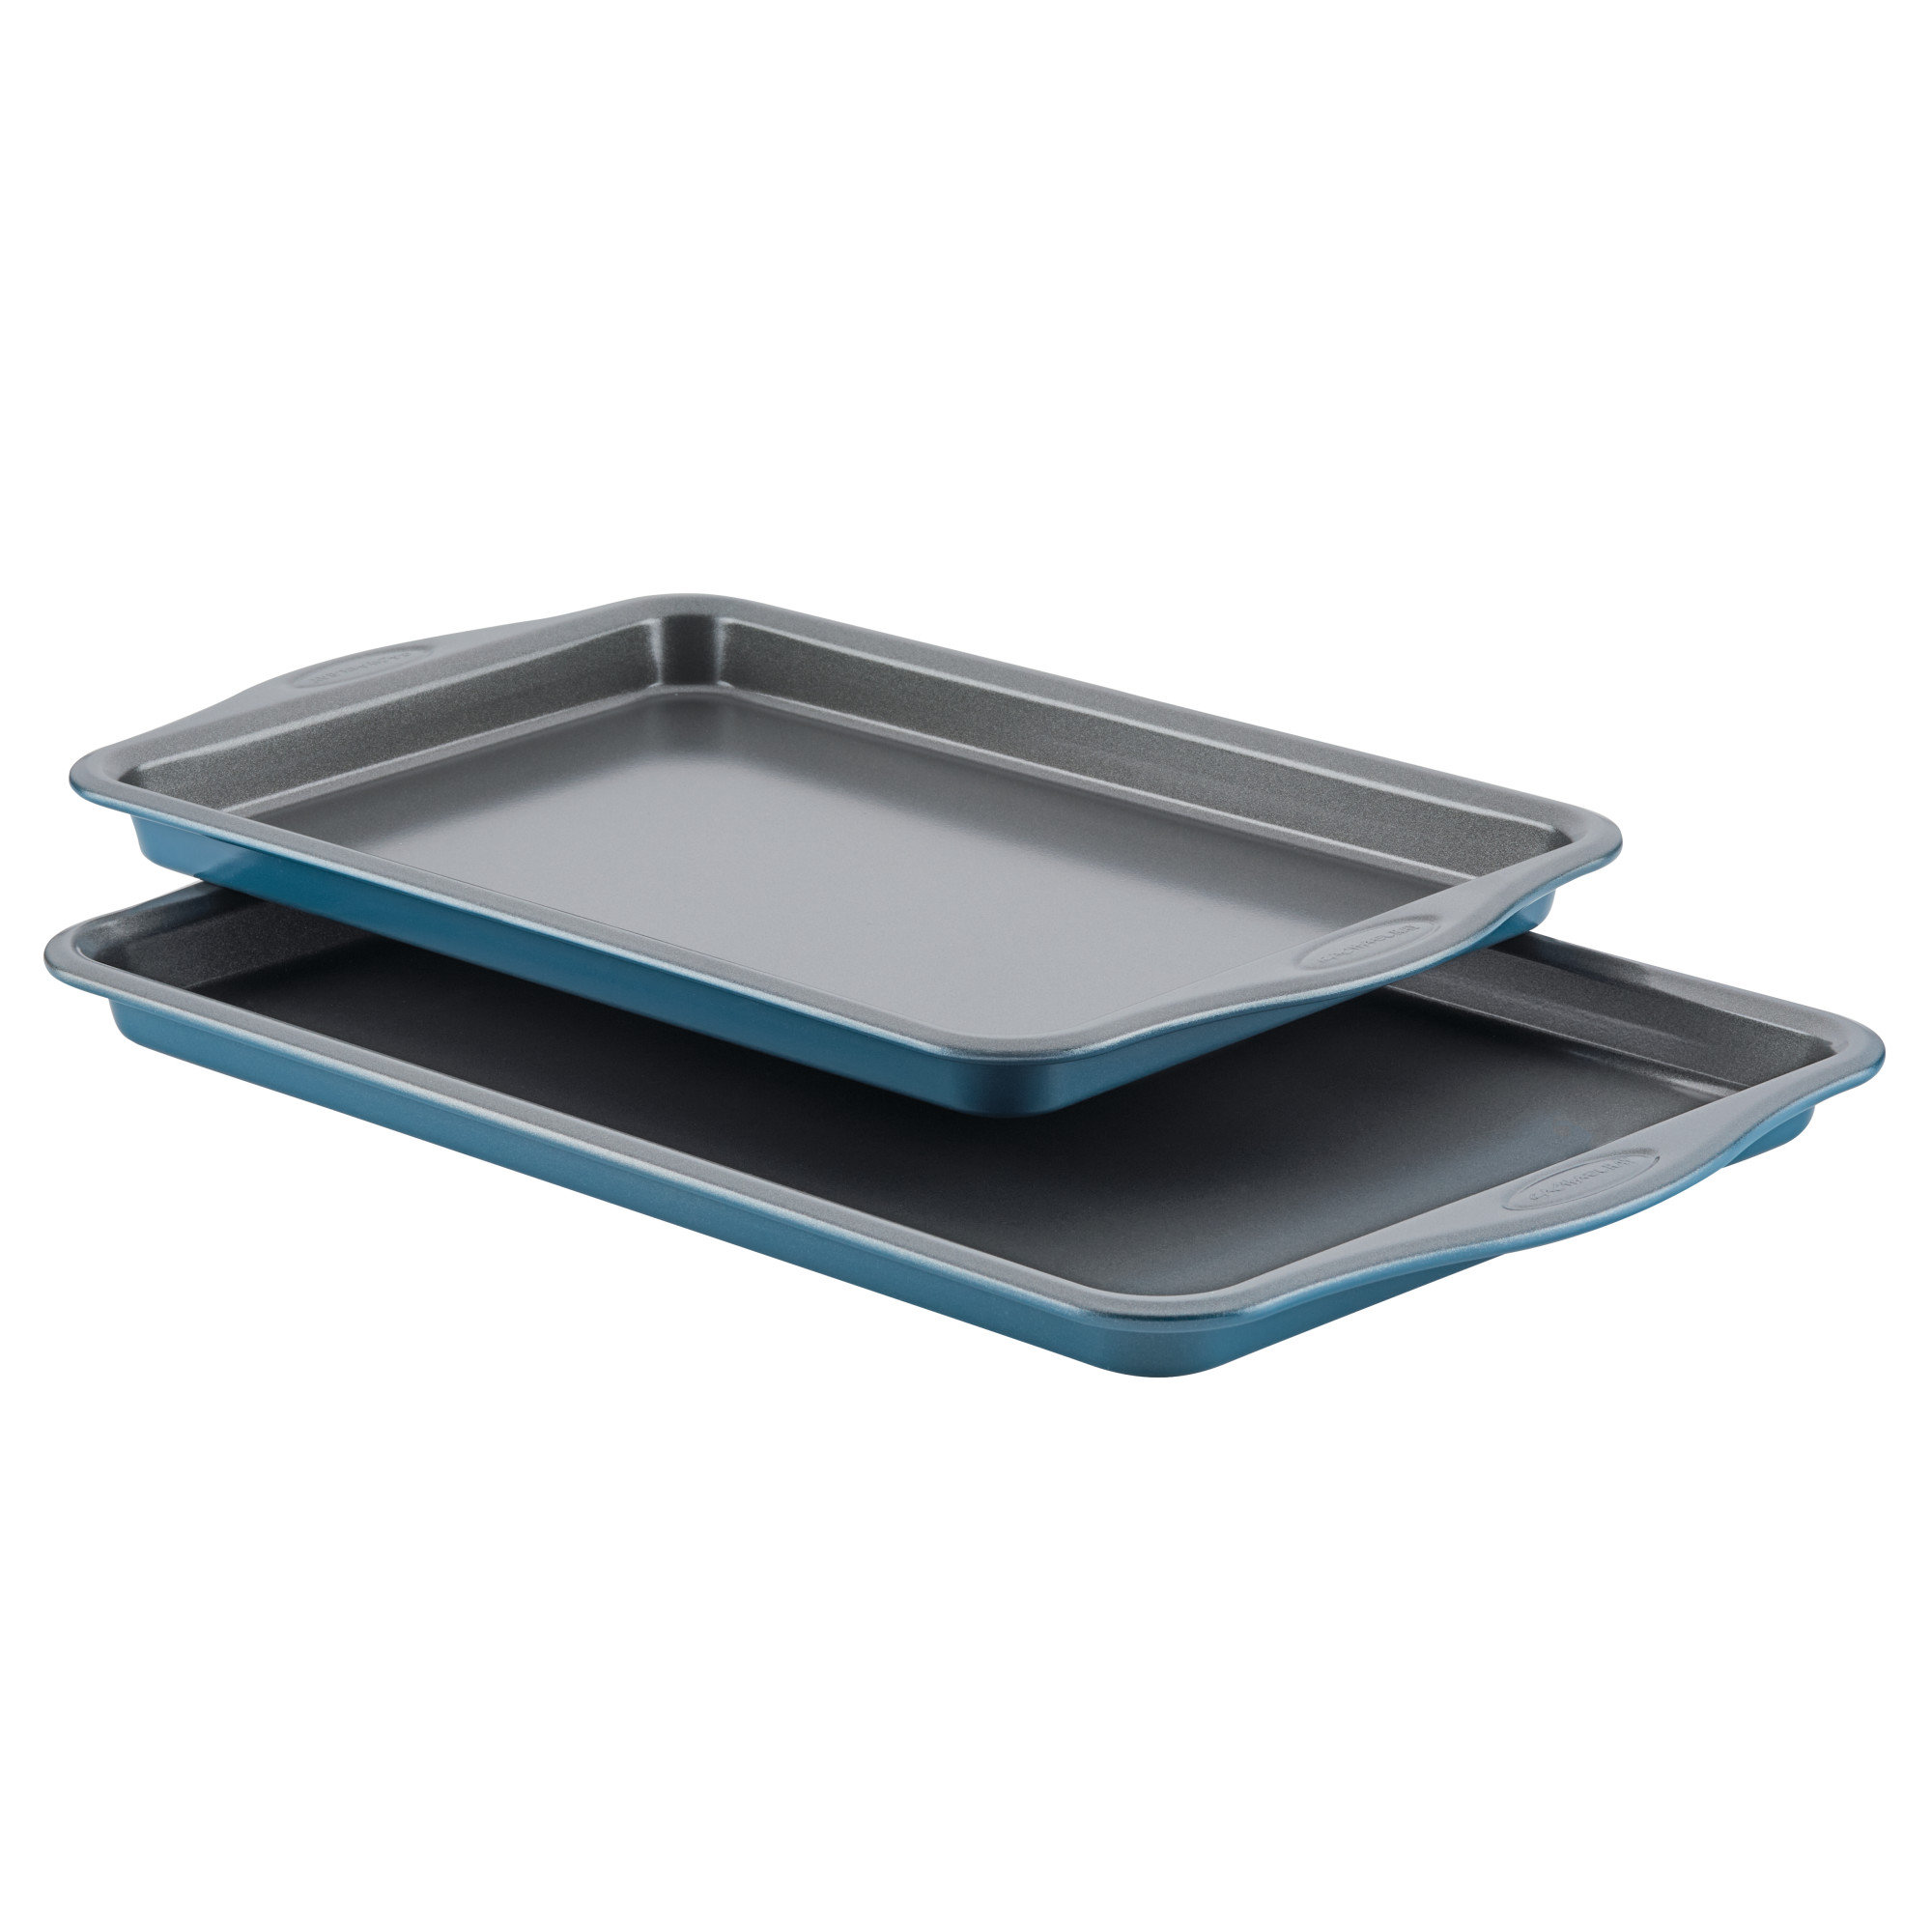 Rachael Ray Baking Sheets Without Grips, 2-Piece, Marine Blue